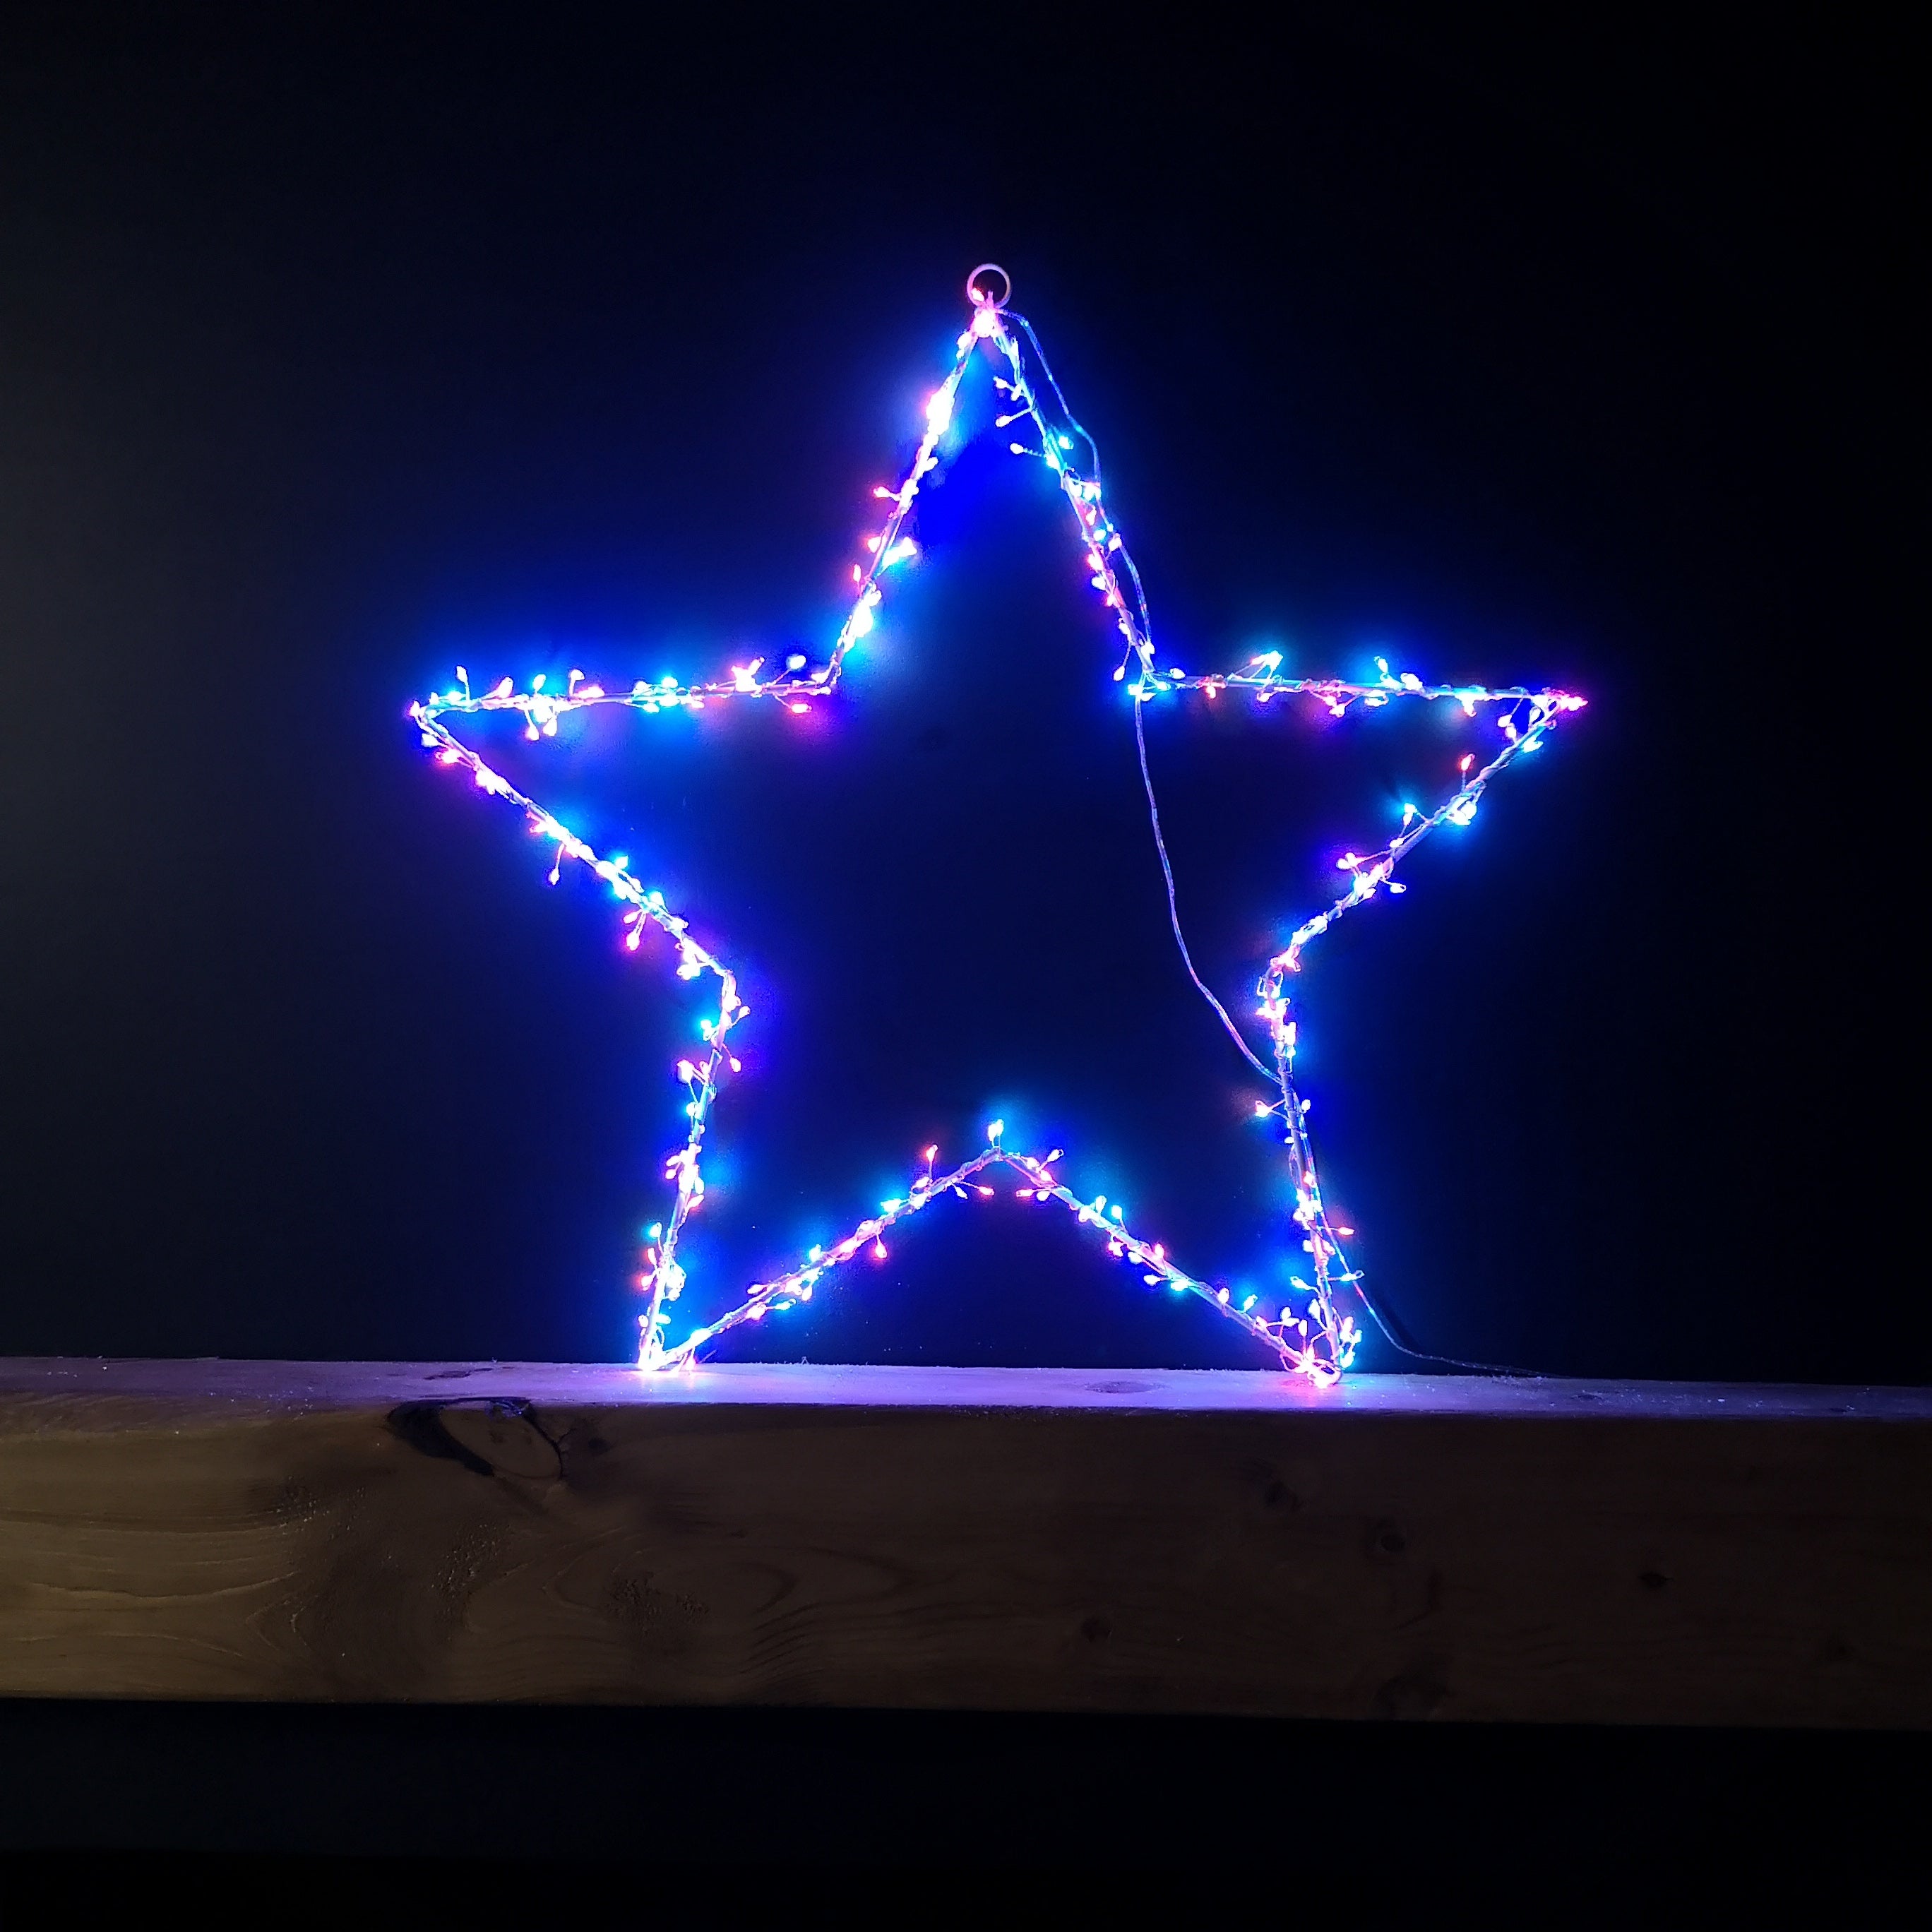 60cm Multi Colour Indoor Outdoor LED Star Light Christmas Decoration